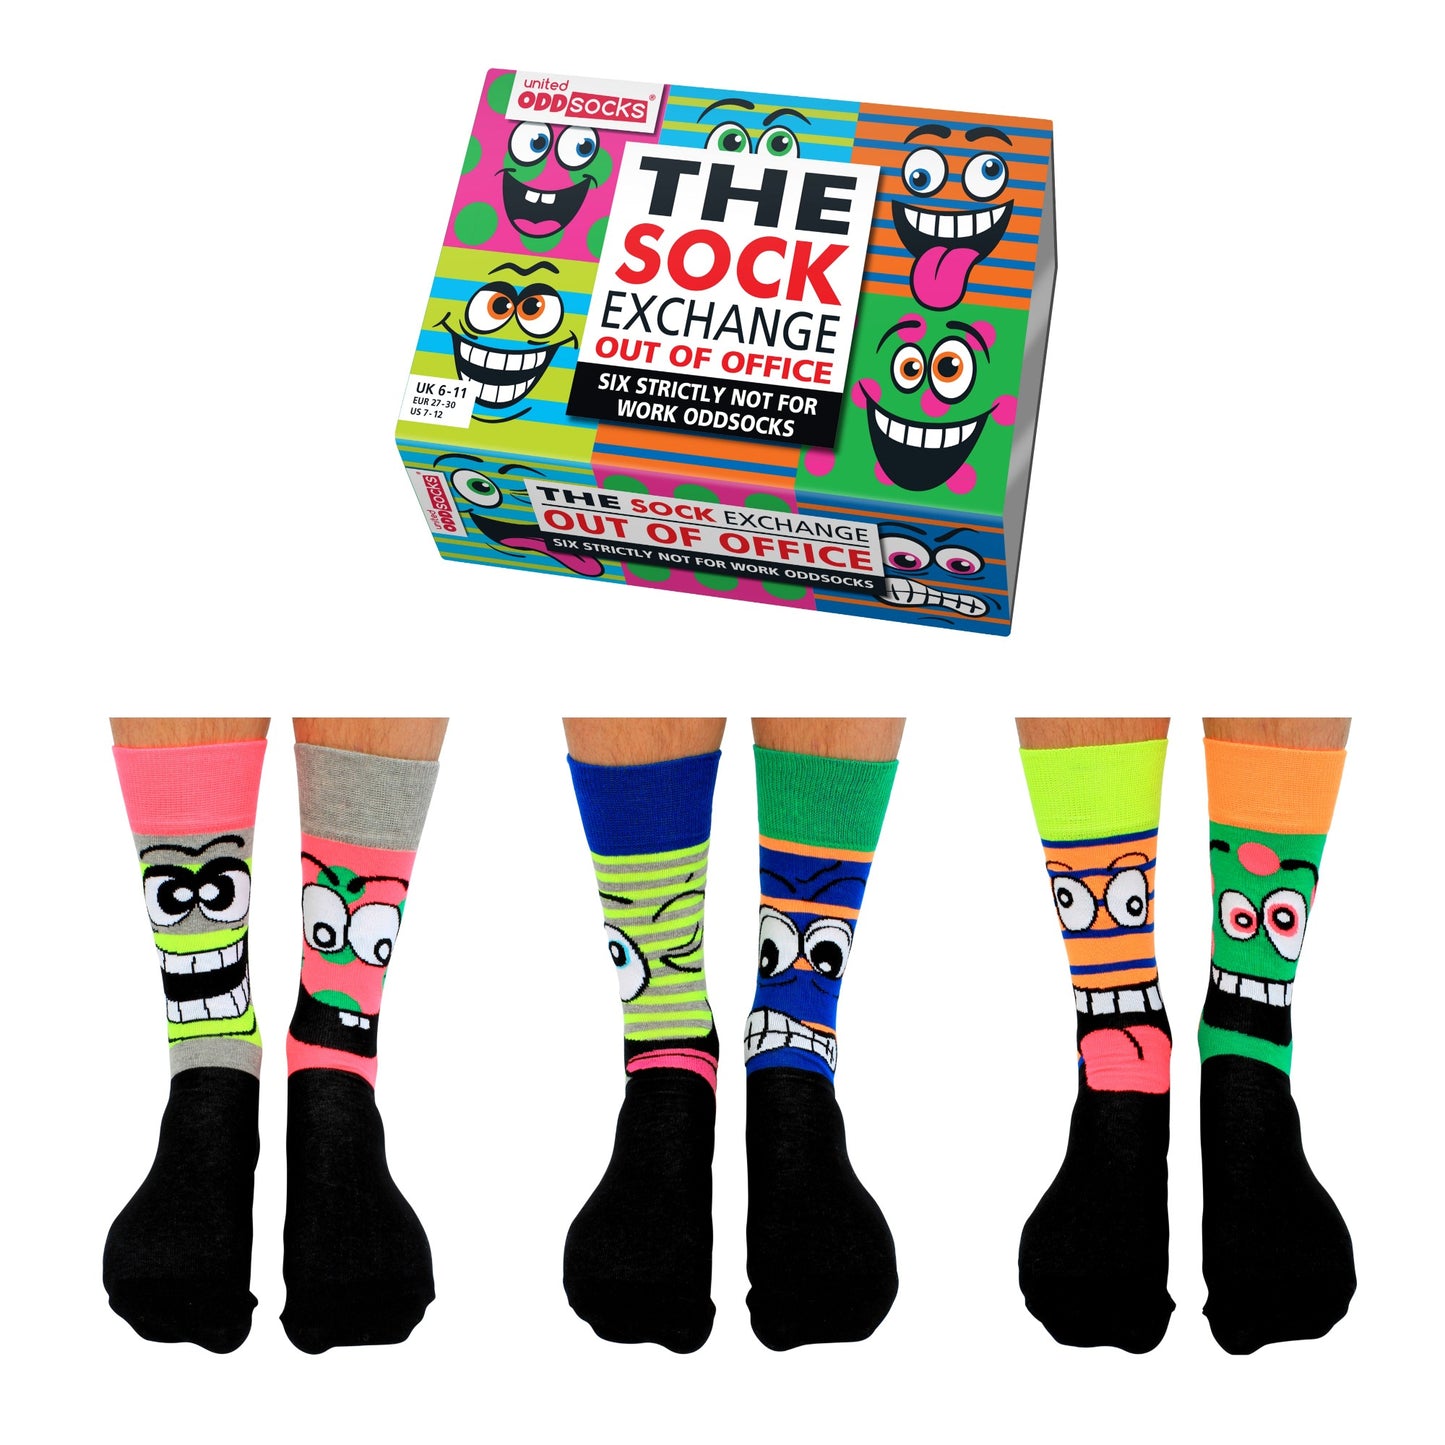 United Oddsocks - The Sock Exchange Out of Office - UK Sizes 6 - 11